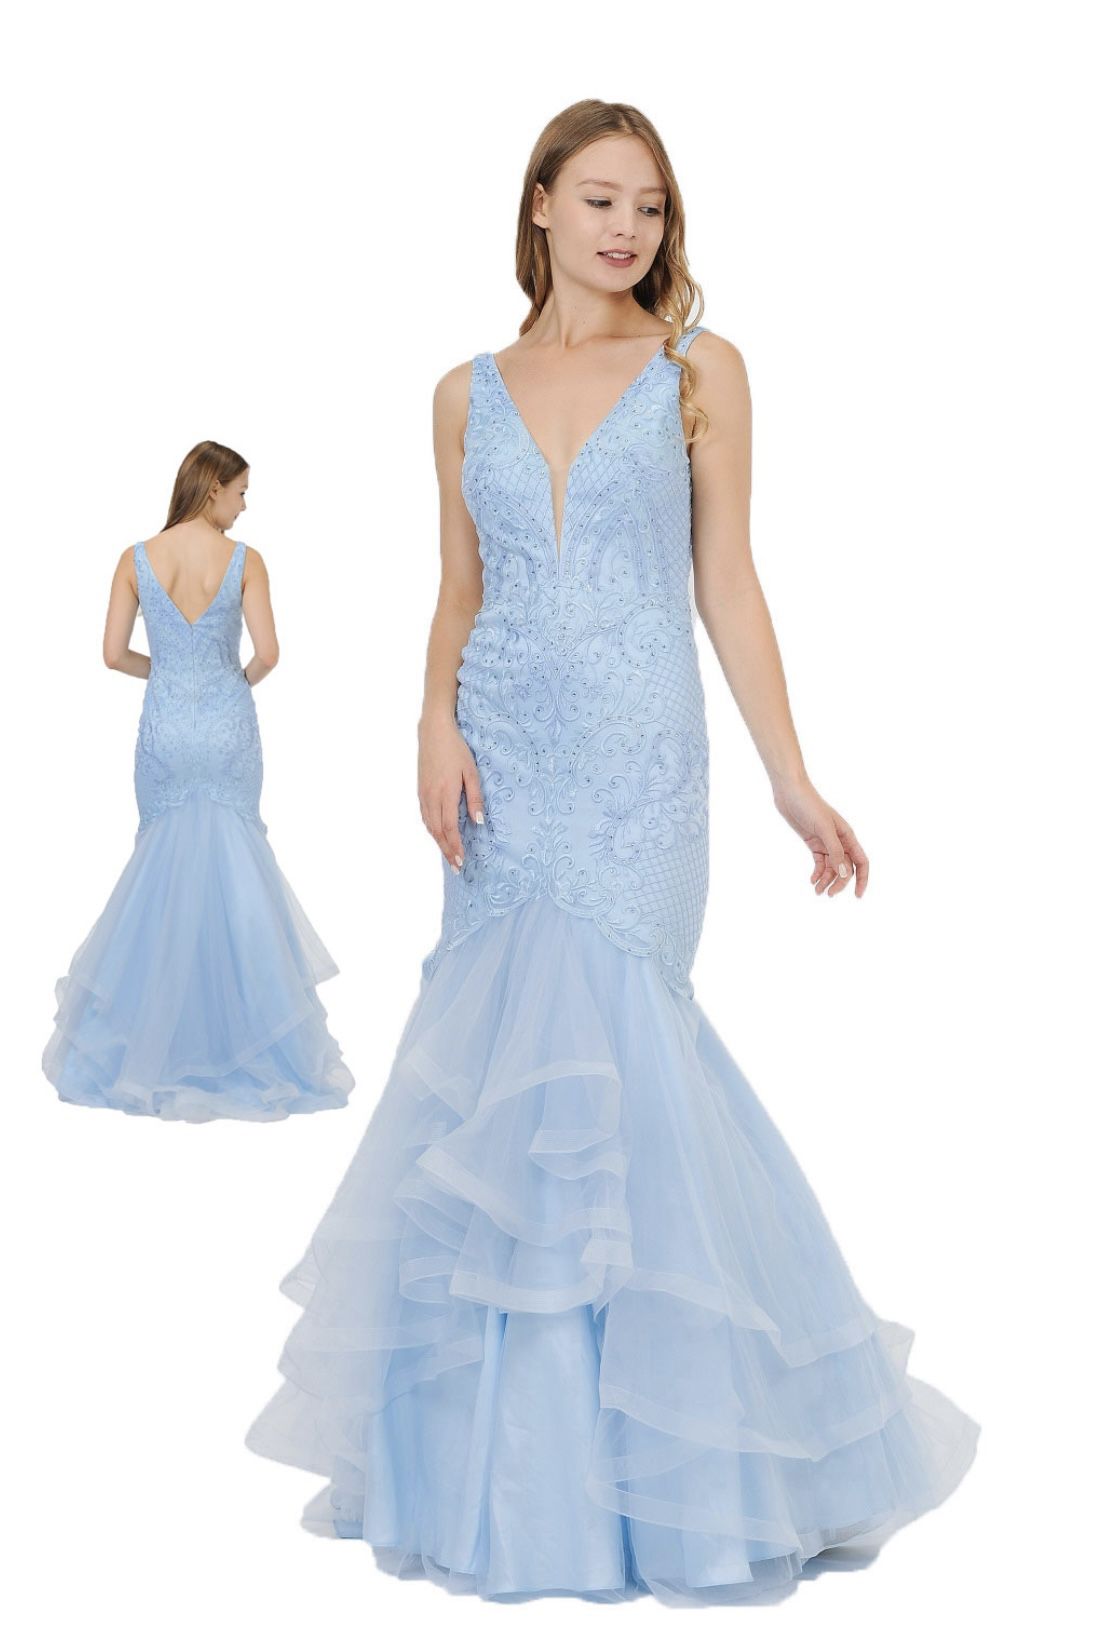 New With Tags Baby Blue Mermaid Formal Dress & Prom Dress $139